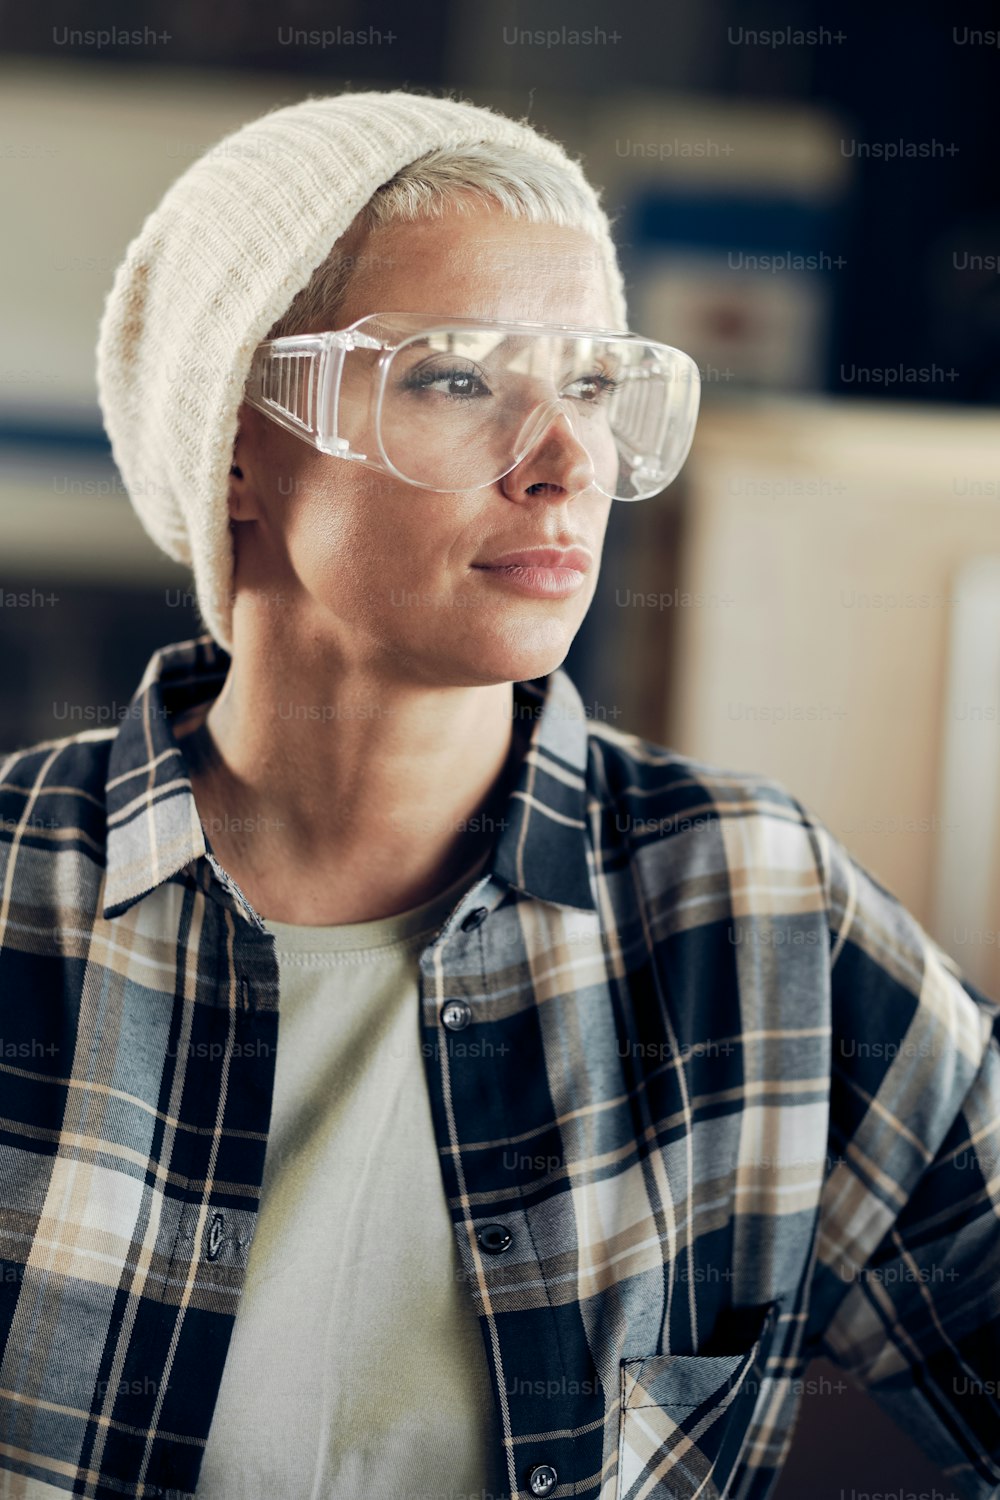 Close up portrait of woman in her 40s working at carpentry, wearing hat, protective eyewear and plaid shirt